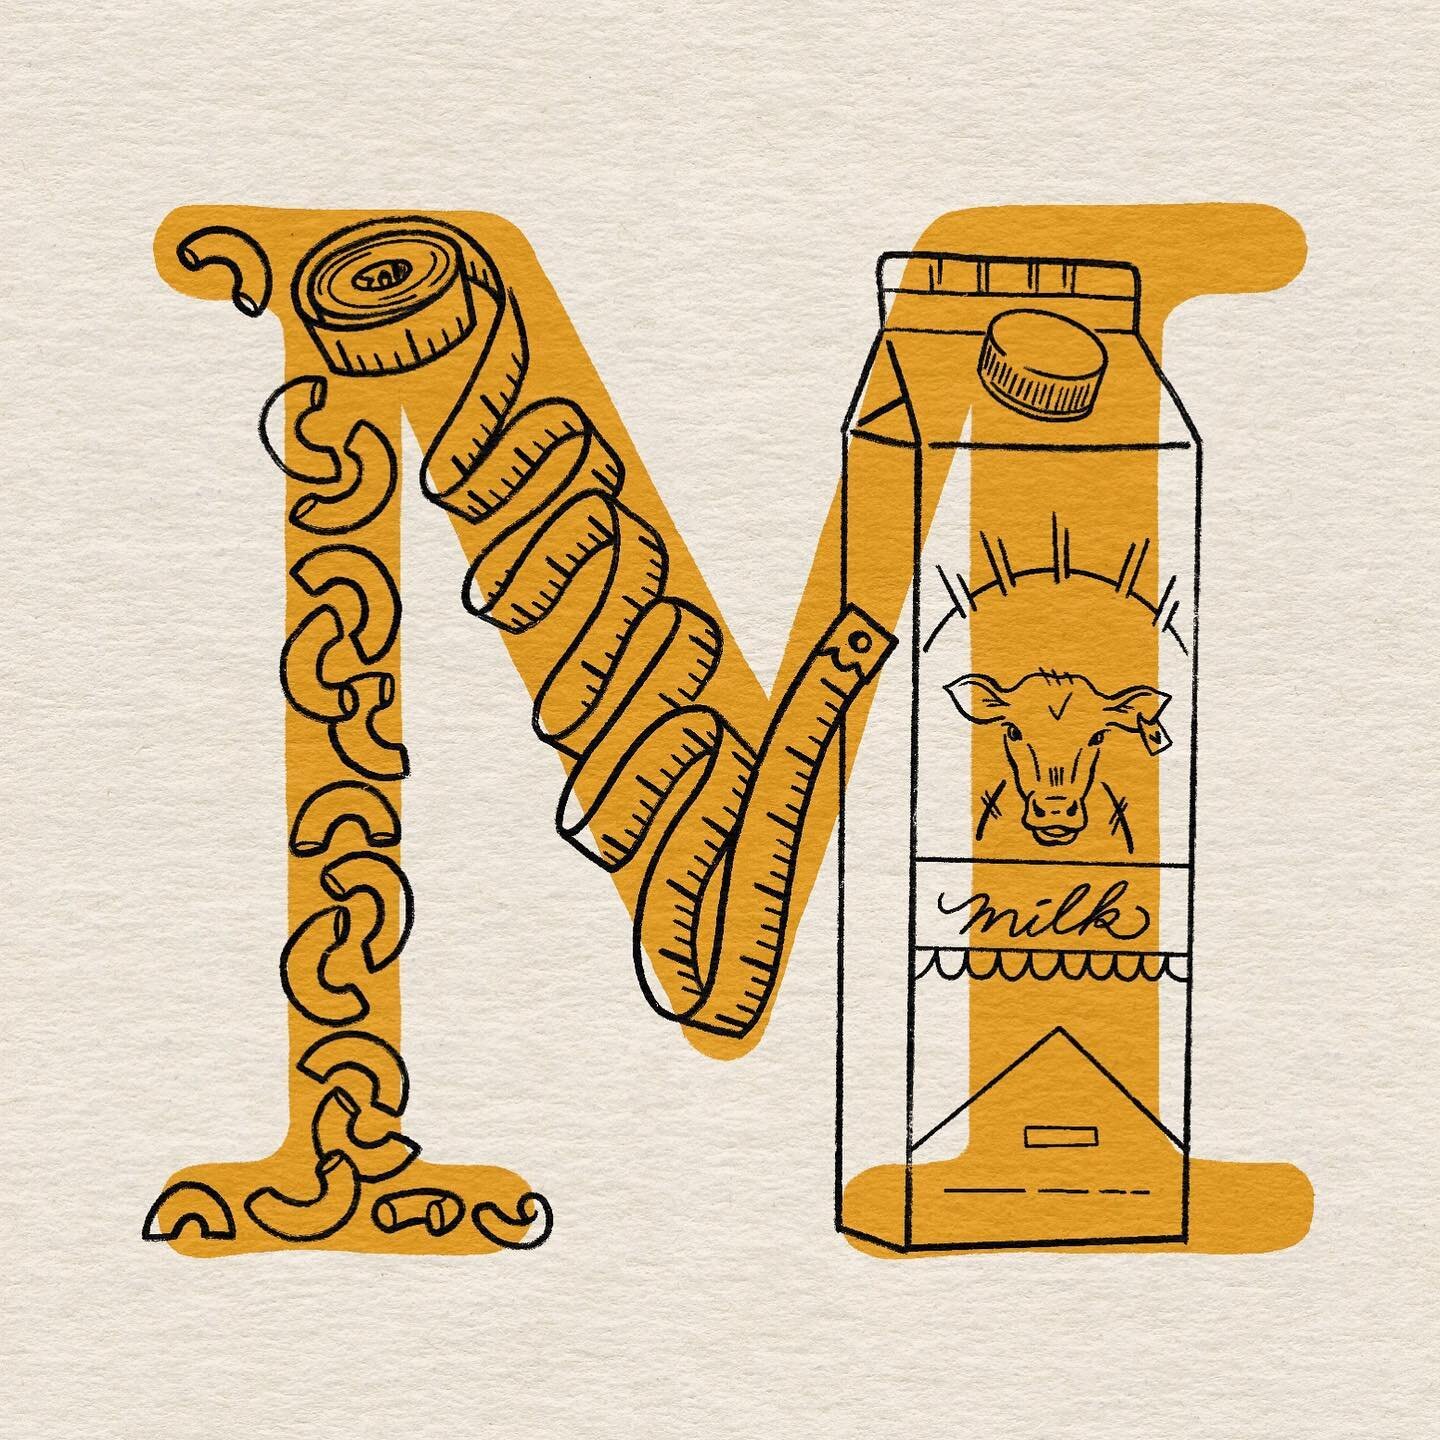 M for #36daysoftype #36days_m 
&hellip;
Macaroni, measuring tape, and milk.
&hellip;
Last one for today. Will be sending my next letters from an airplane ✈️